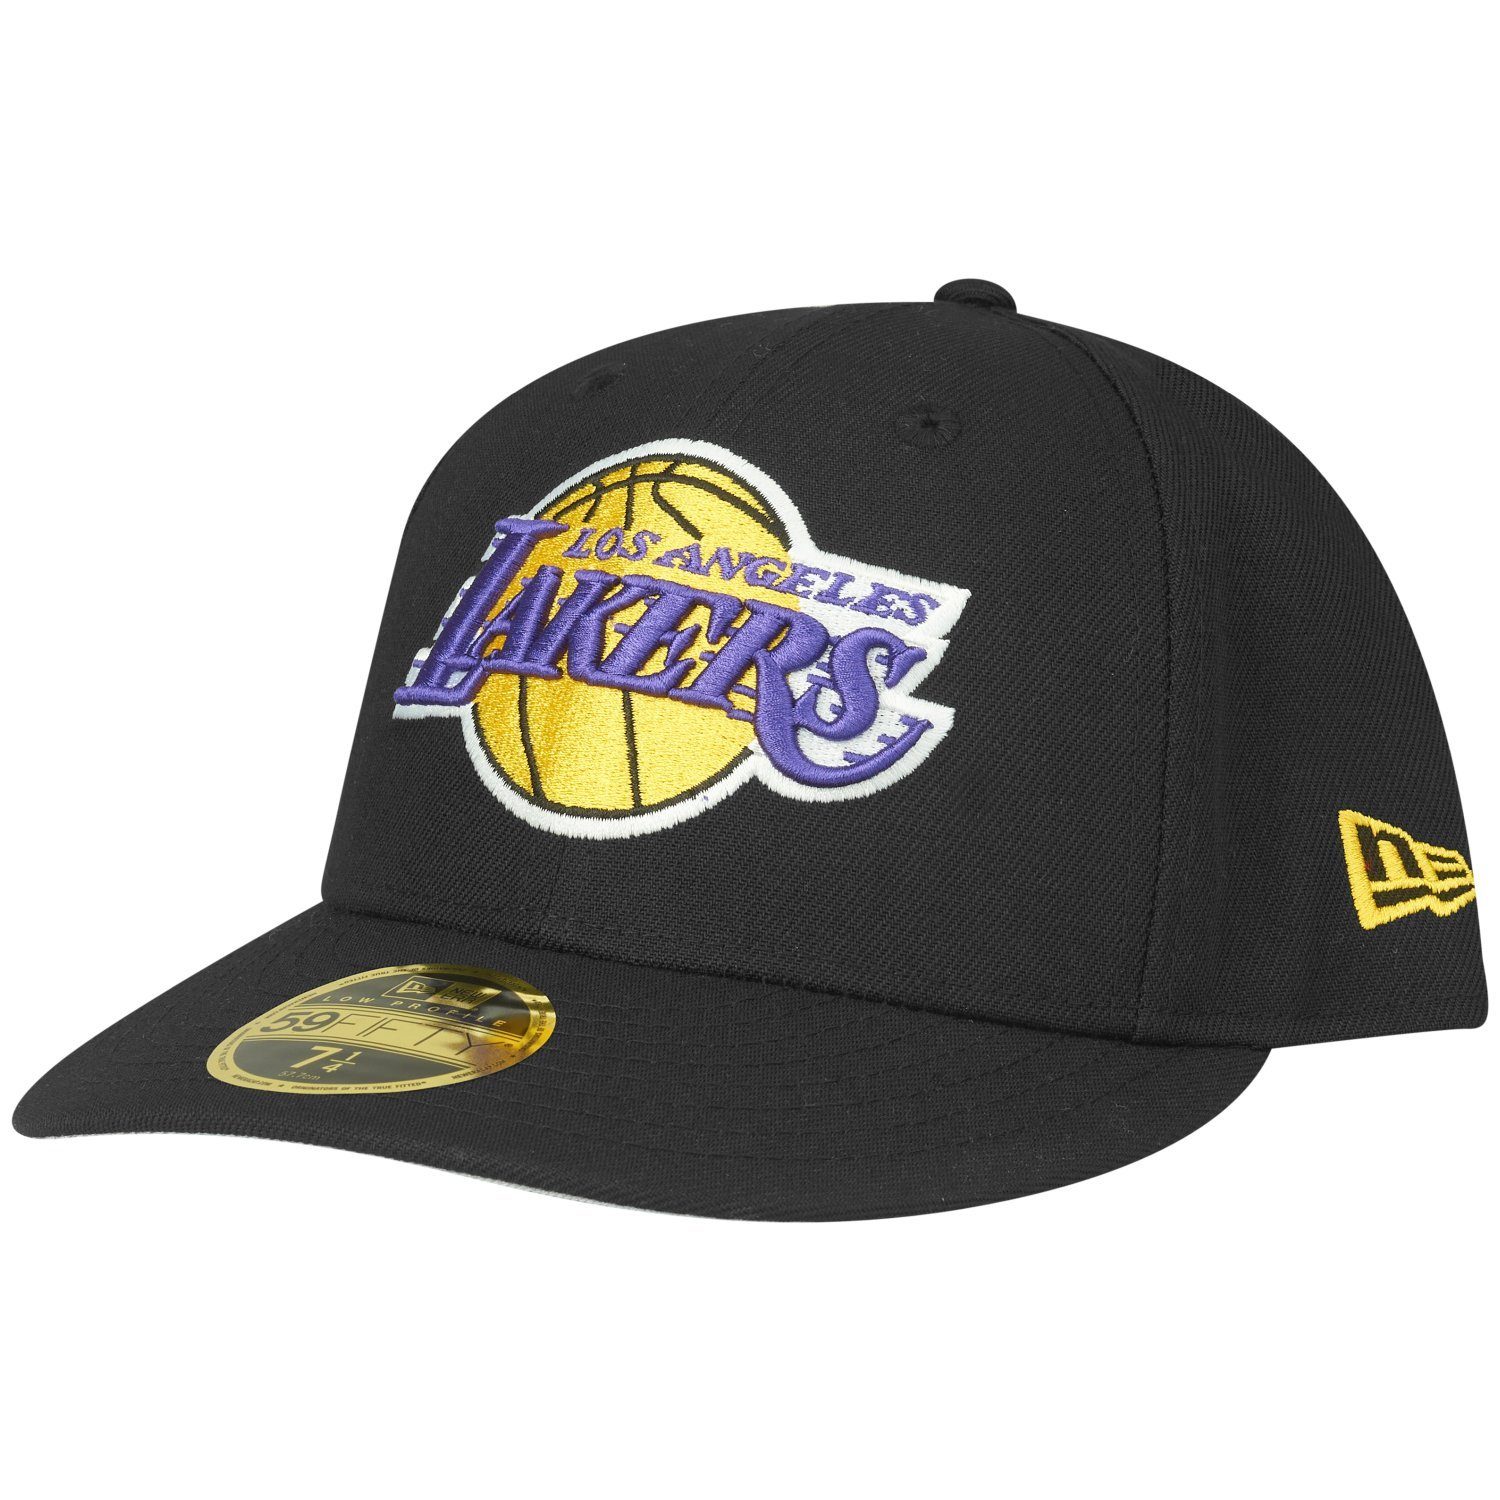 Herren Caps New Era Fitted Cap 59Fifty Low Profile Los Angeles Lakers